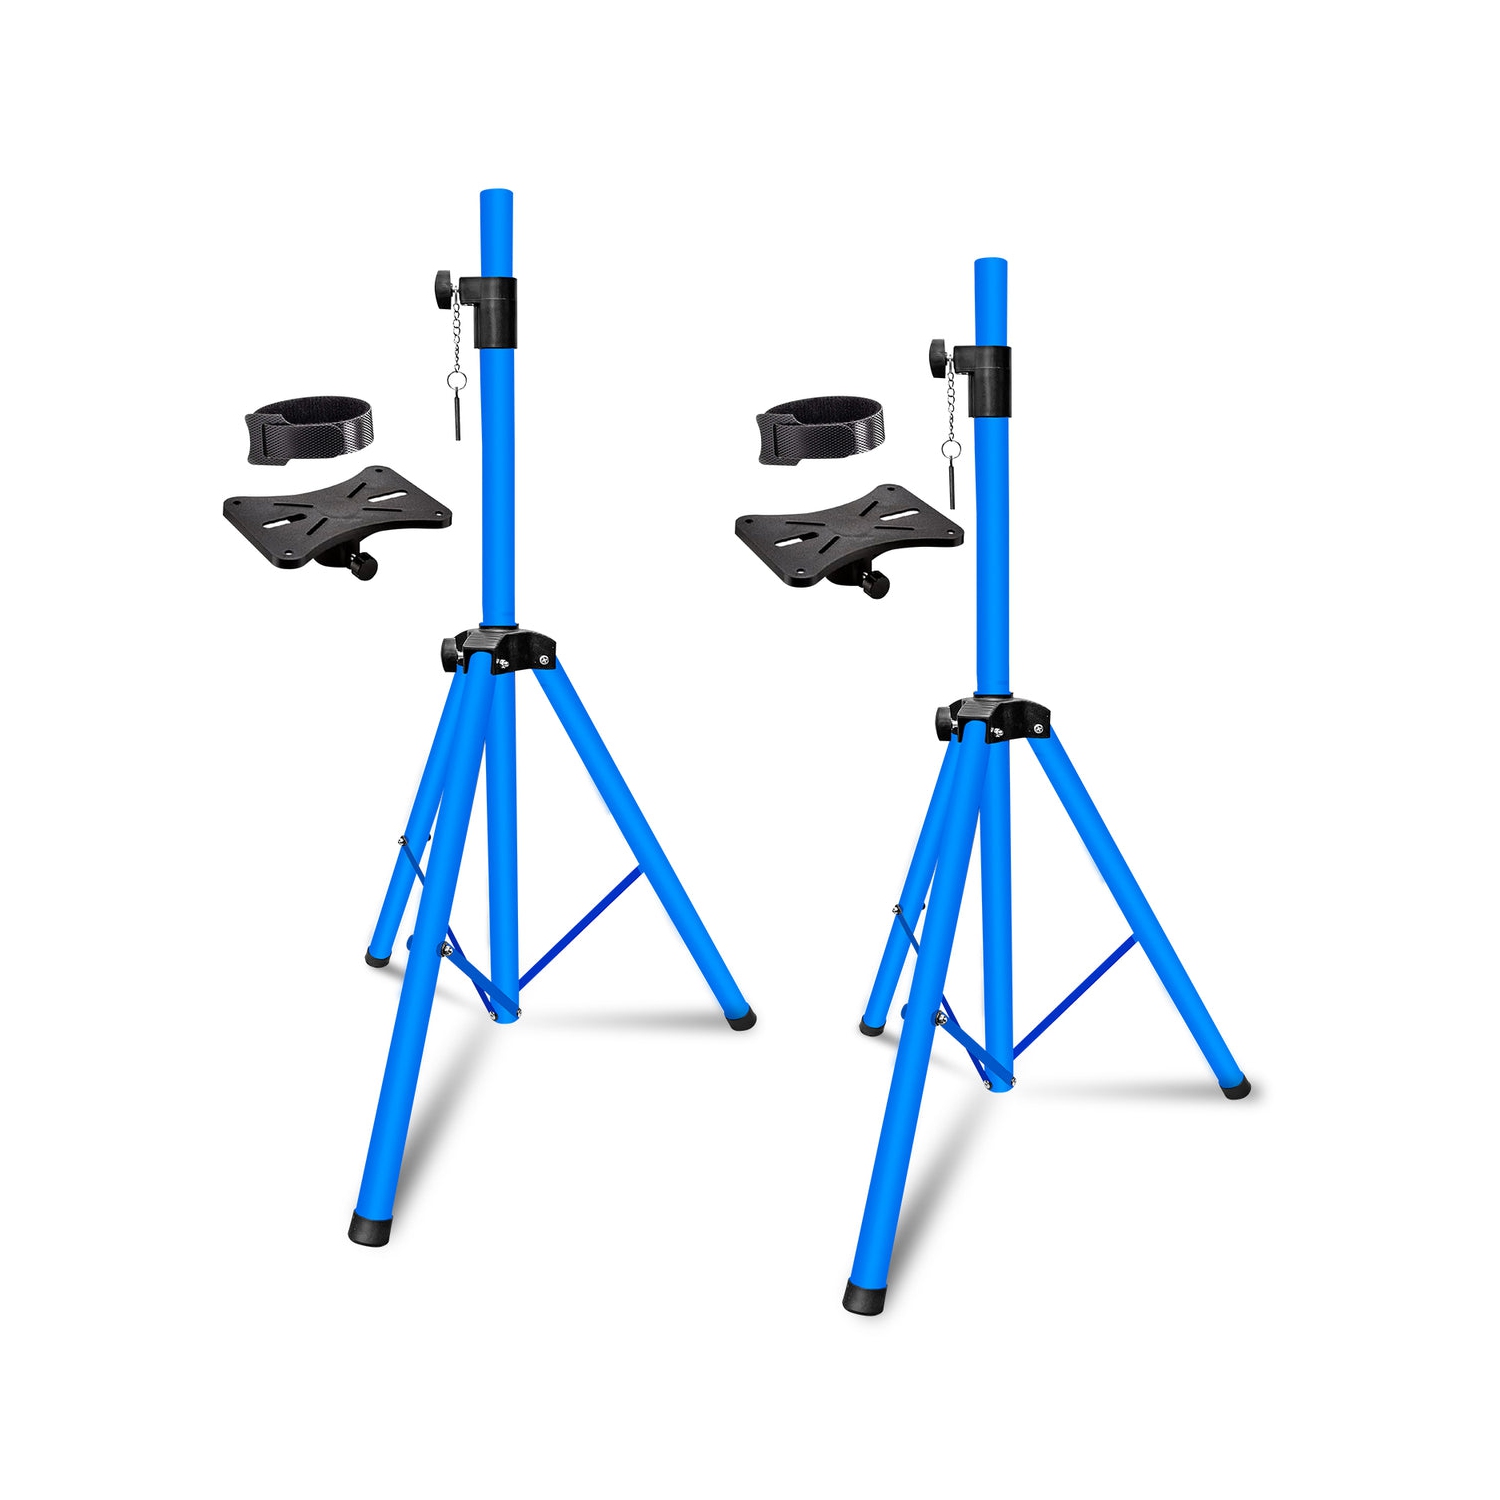 5 Core Speakers Stands 2 Piece Sky Blue Height Adjustable Tripod PA Studio Monitor Holder for Large Speakers DJ Stand Para Bocinas - SS ECO 2PK SKY BLU WoB